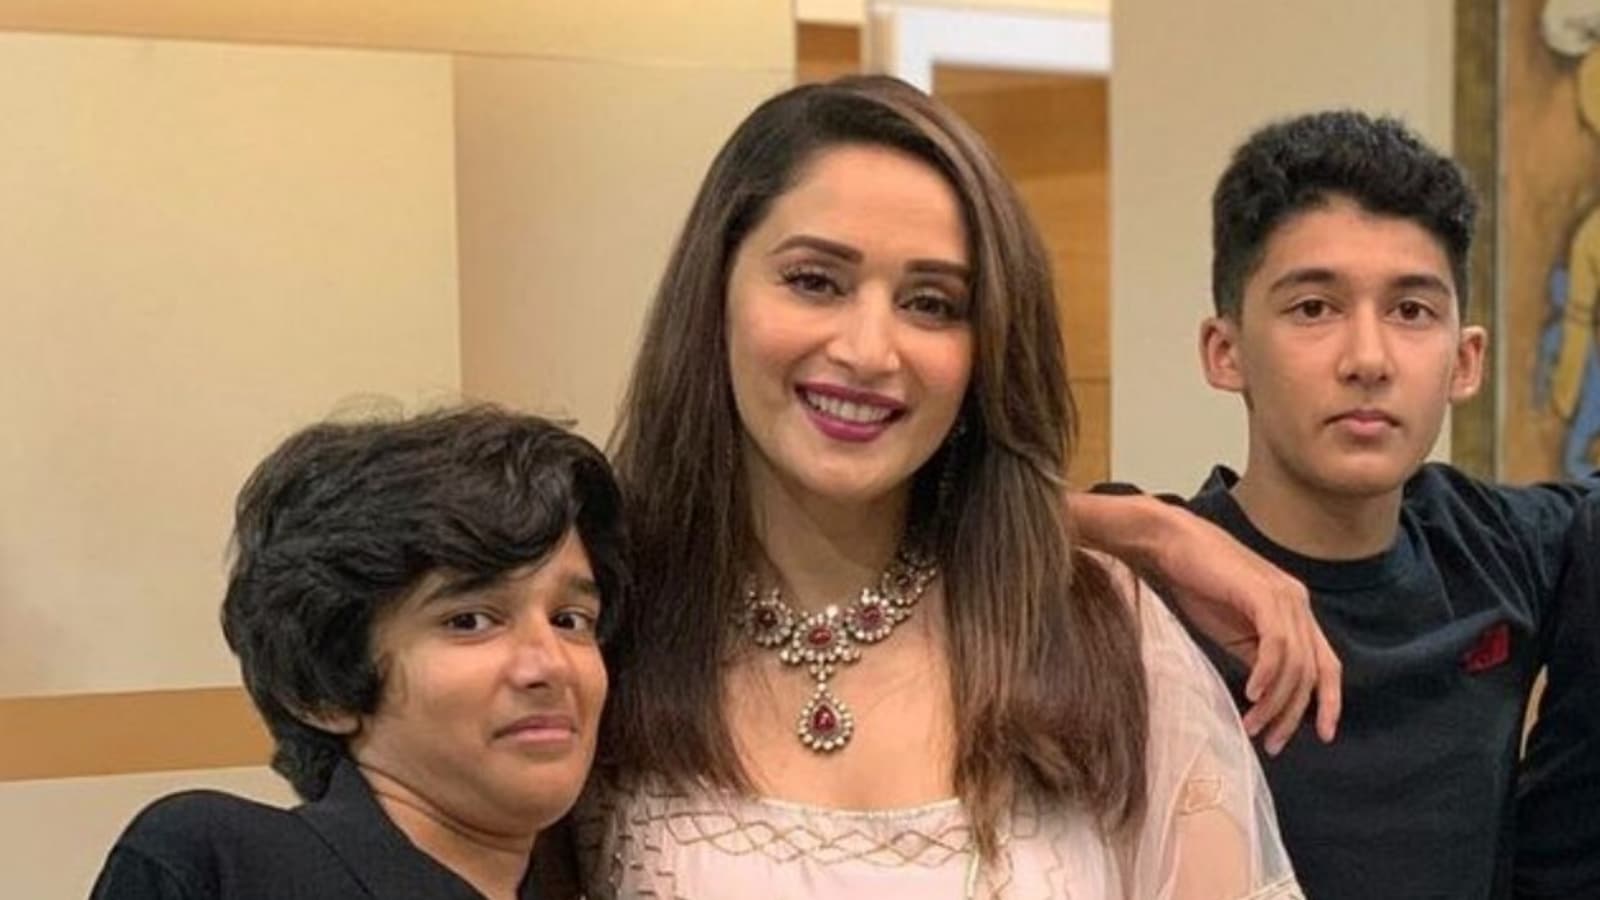 Madhuri Dixit recalls when her son was annoyed as his friend told him: ‘You’re lucky she is your mom’